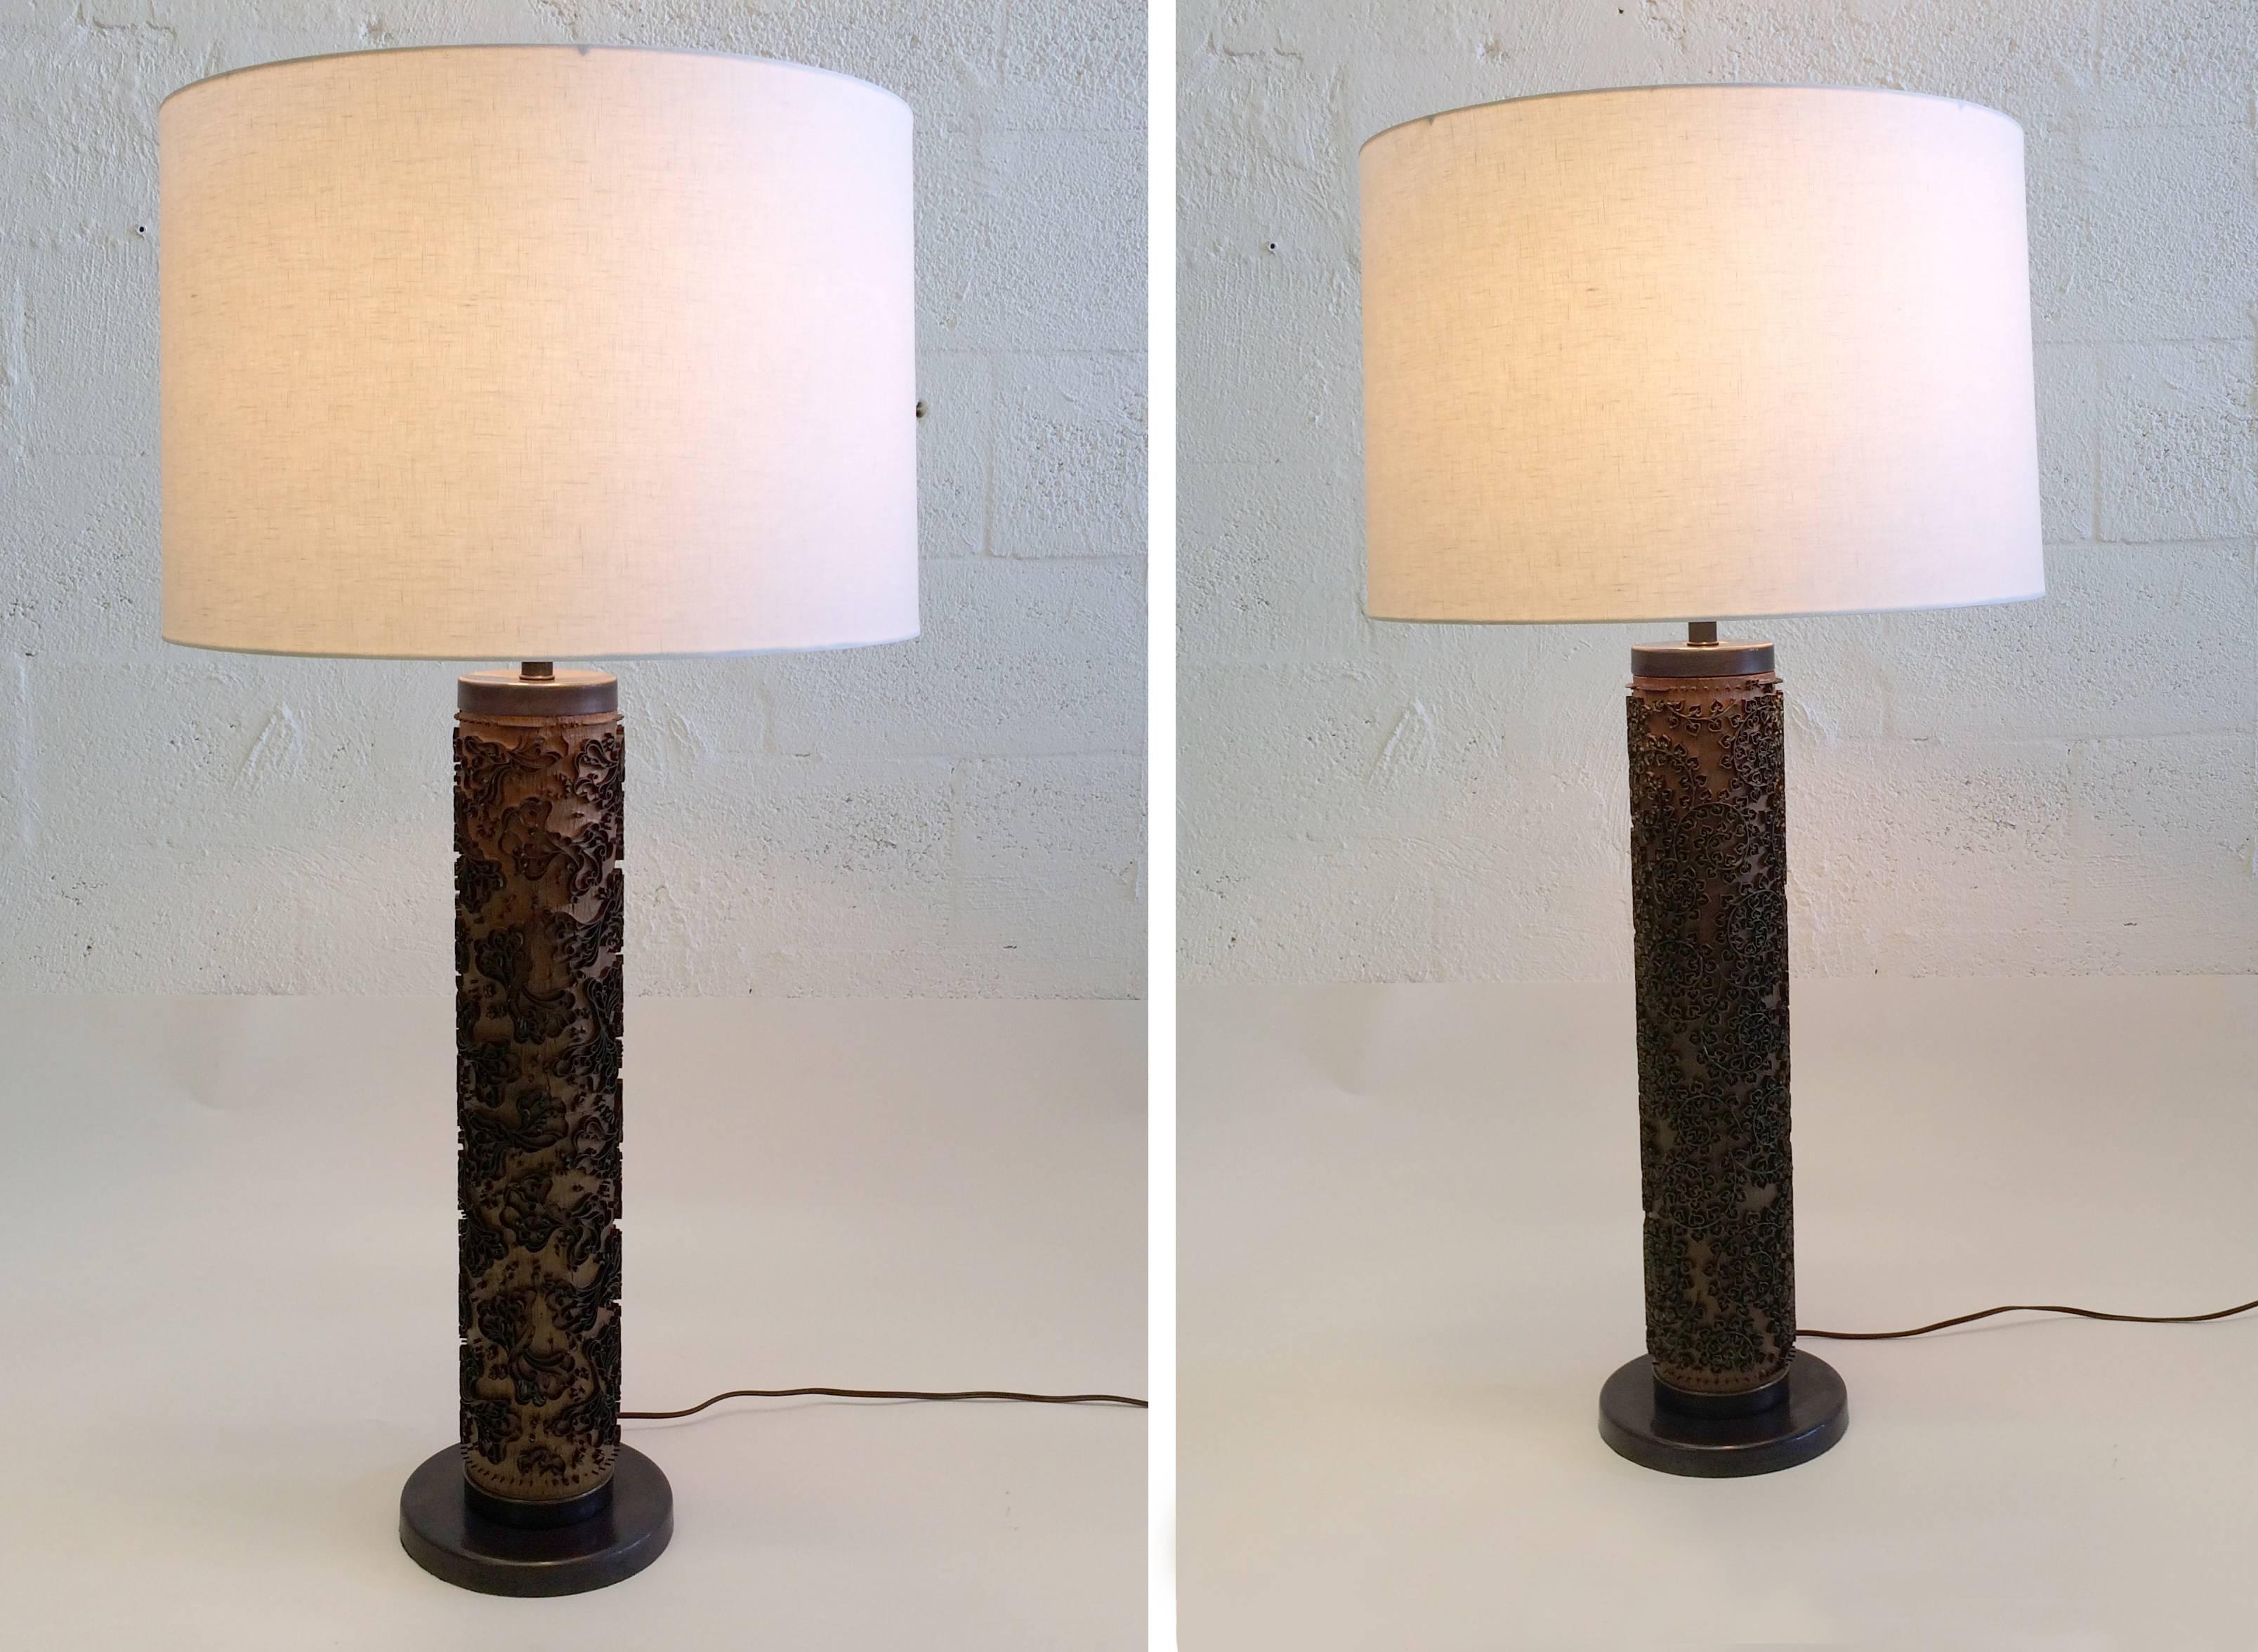 Unique wood and brass table lamps made from vintage wallpaper rollers from the well-known company Dahls Tapetkunst. The lamps are signed Dahls Copenhagen Denmark. The linen shades are new.